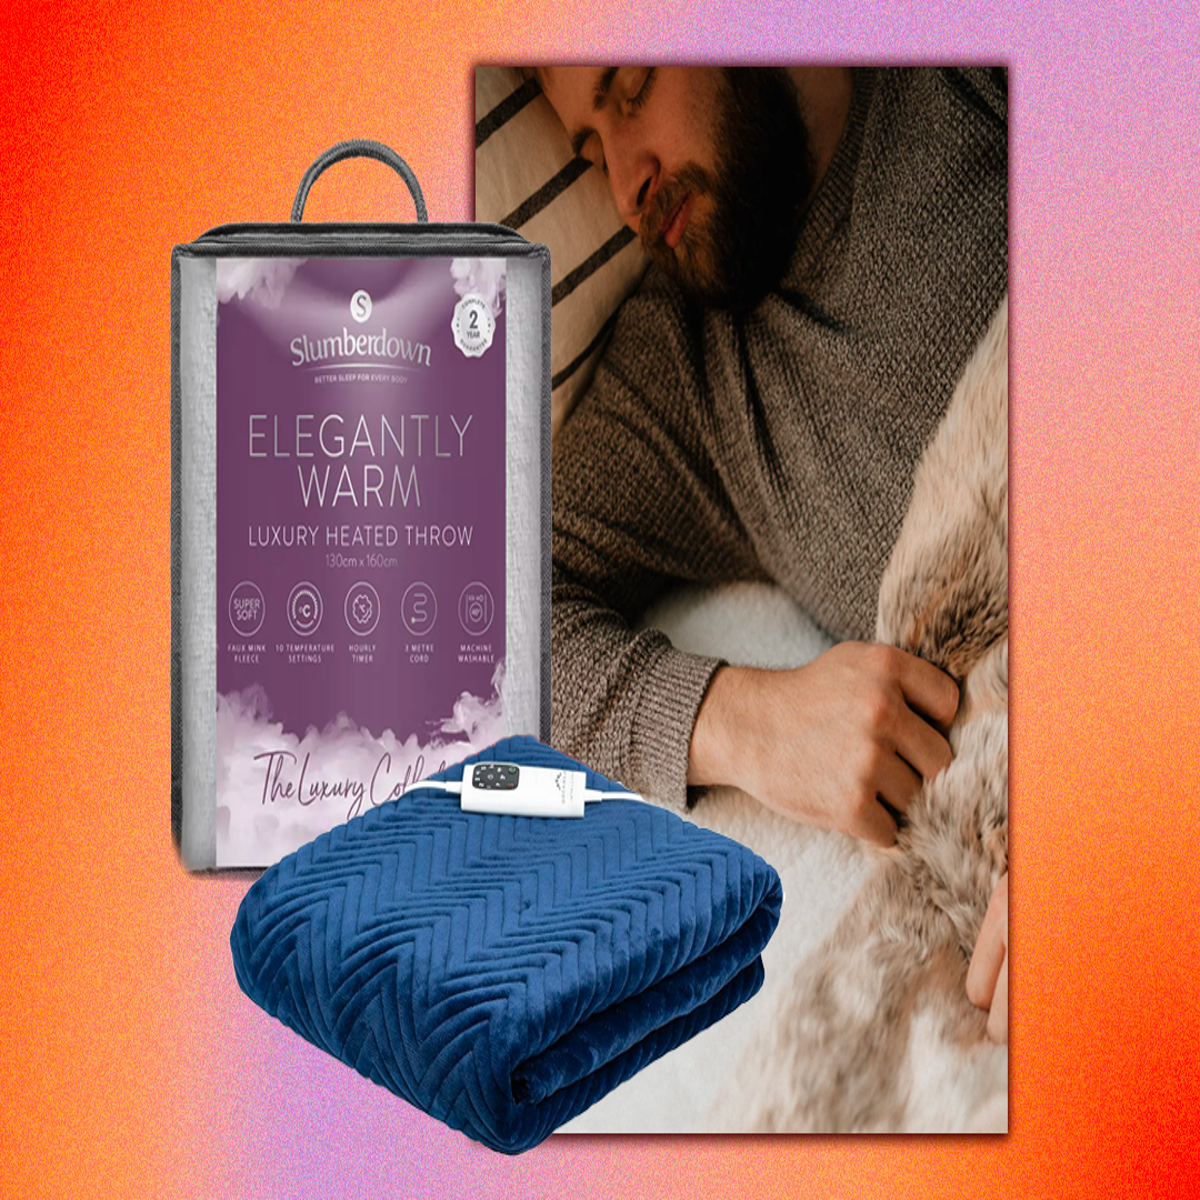 Cordless Rechargeable Portable Heated Blanket - Stay Warm Outdoors